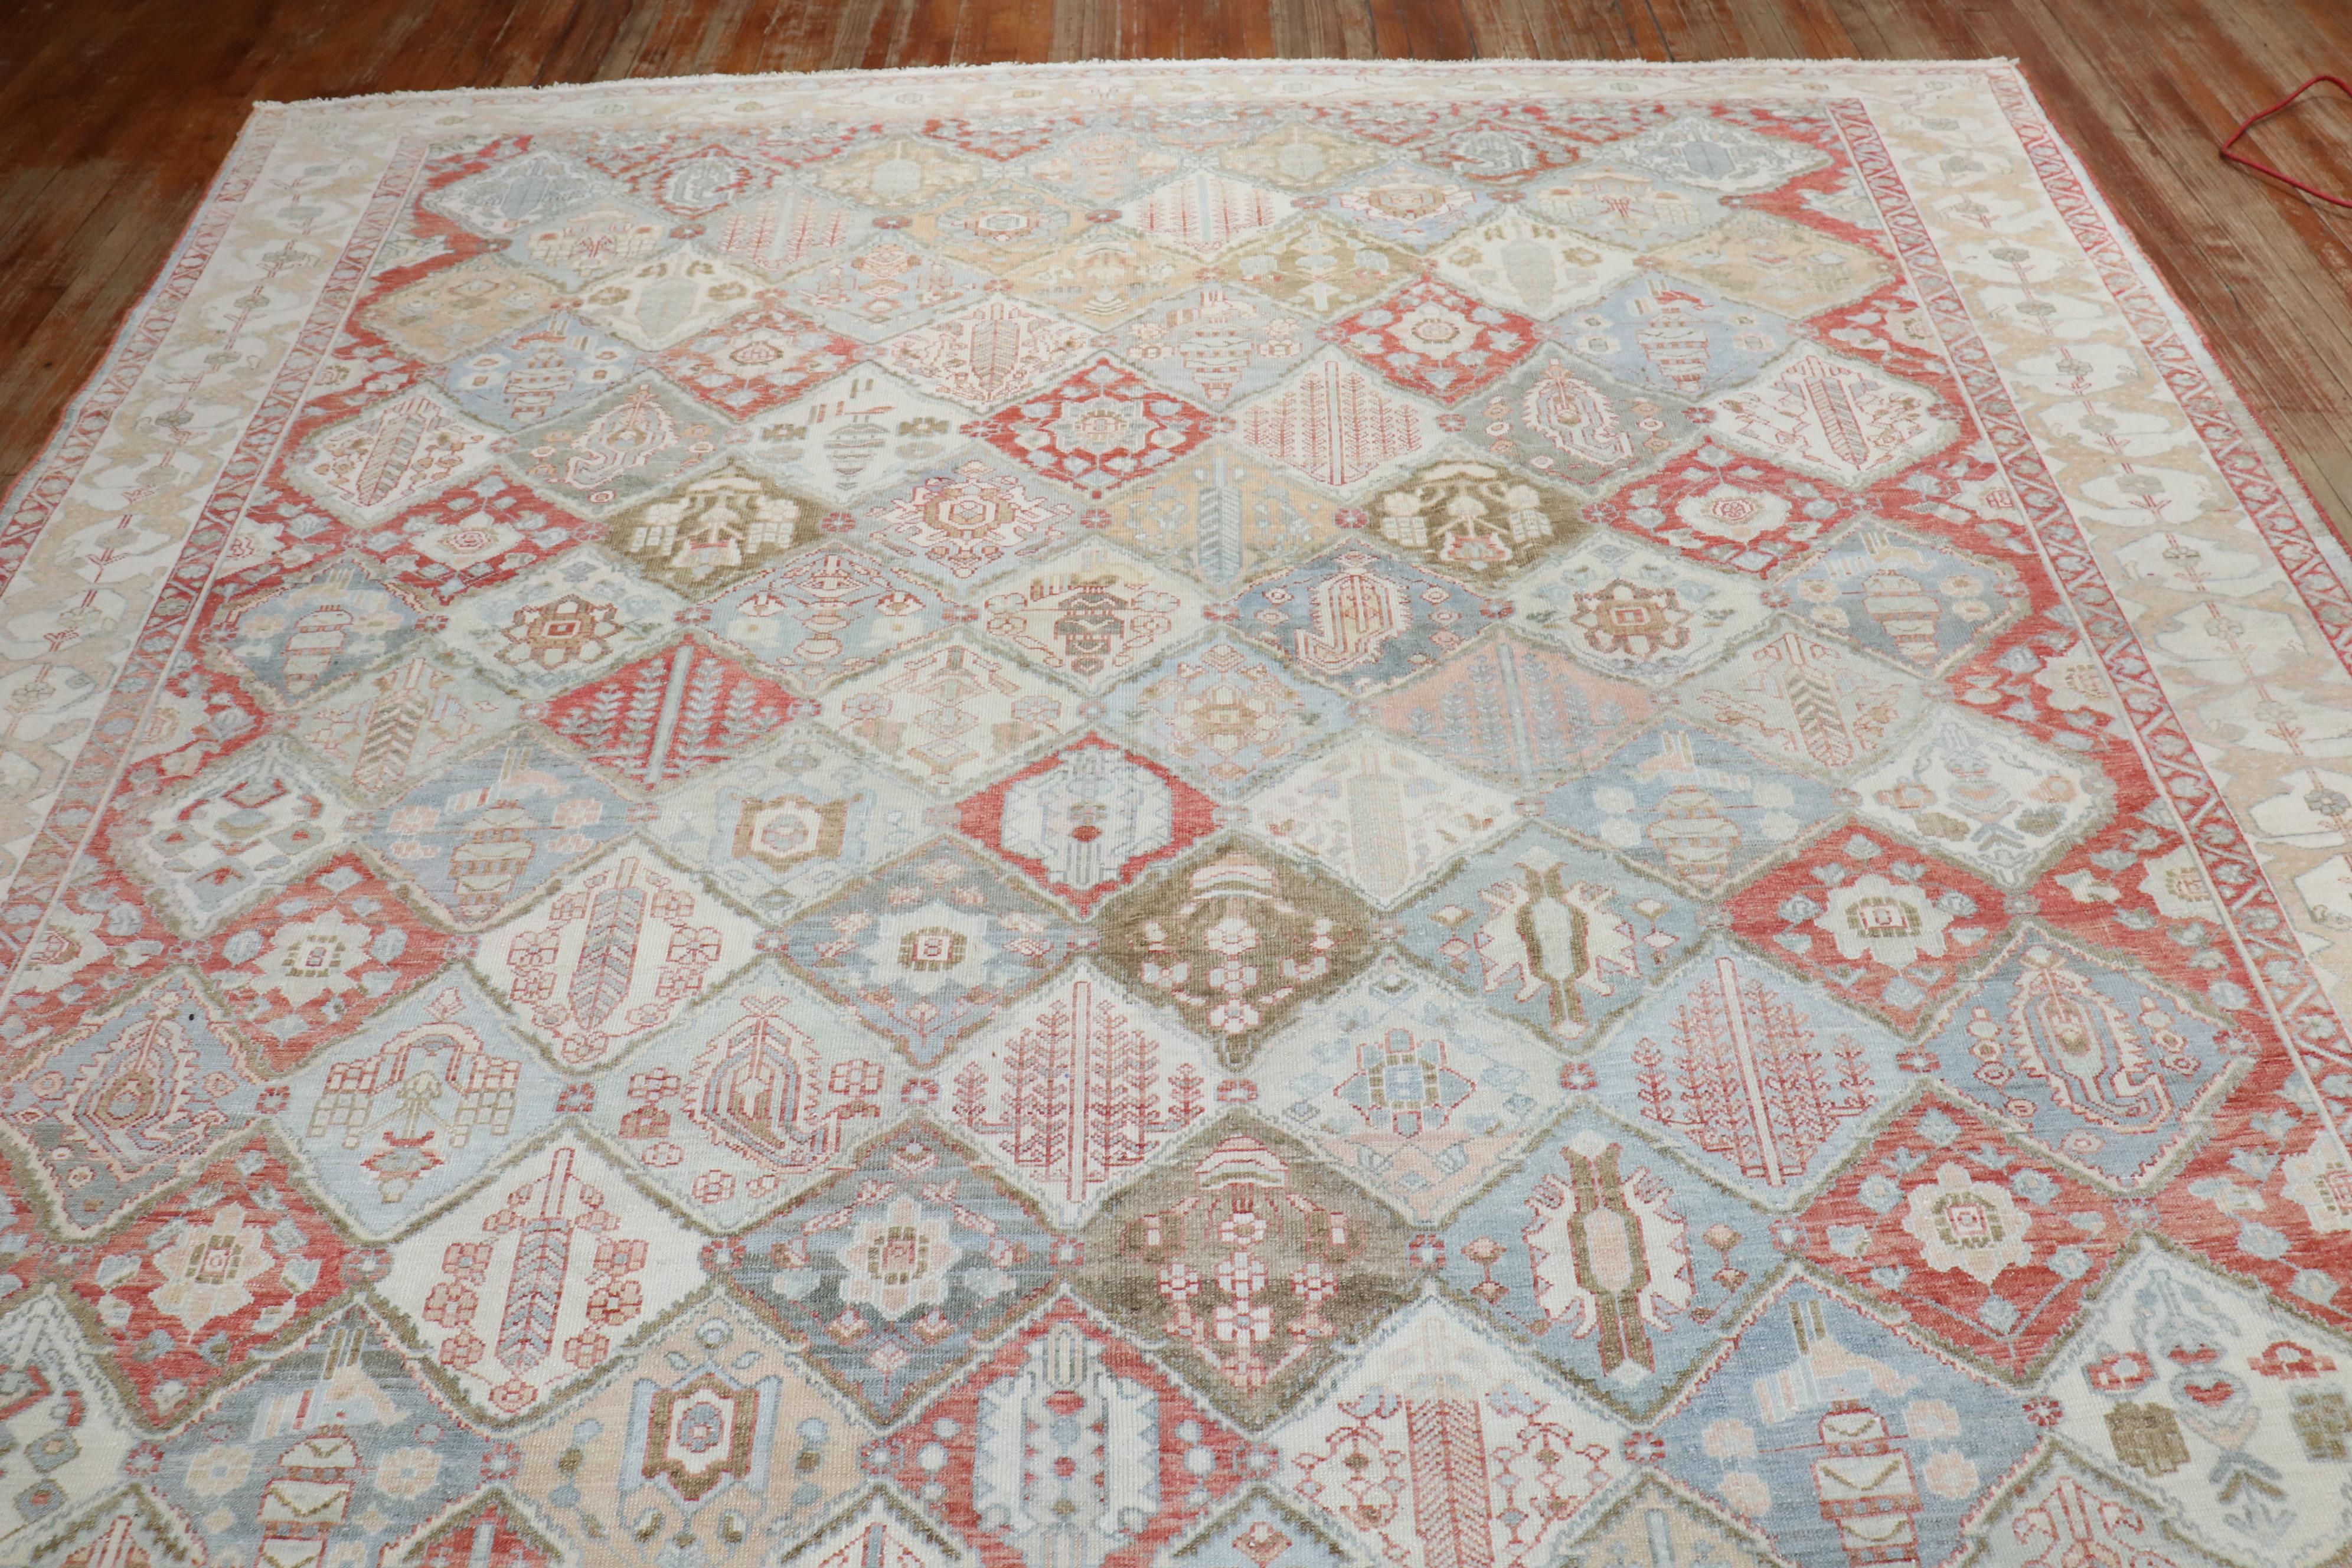 A room size Geometric Persian Bakhtiari rug with an all-over garden design in rustic / earth tone colors throughout

Measures: 10'x 13'8'' circa 1920